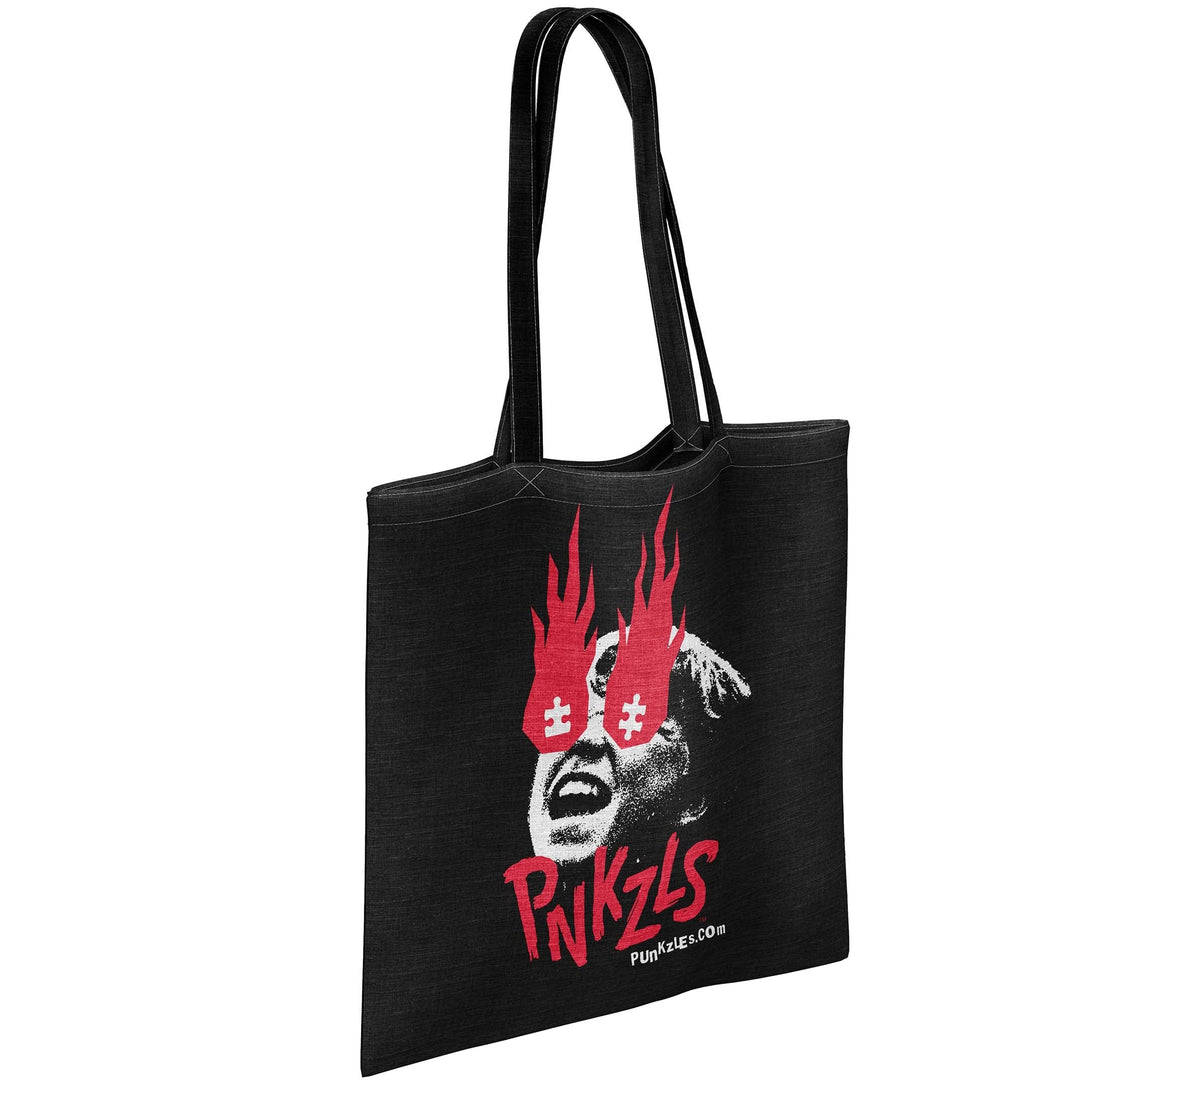 punkzles tote bag with flaming puzzle eyes